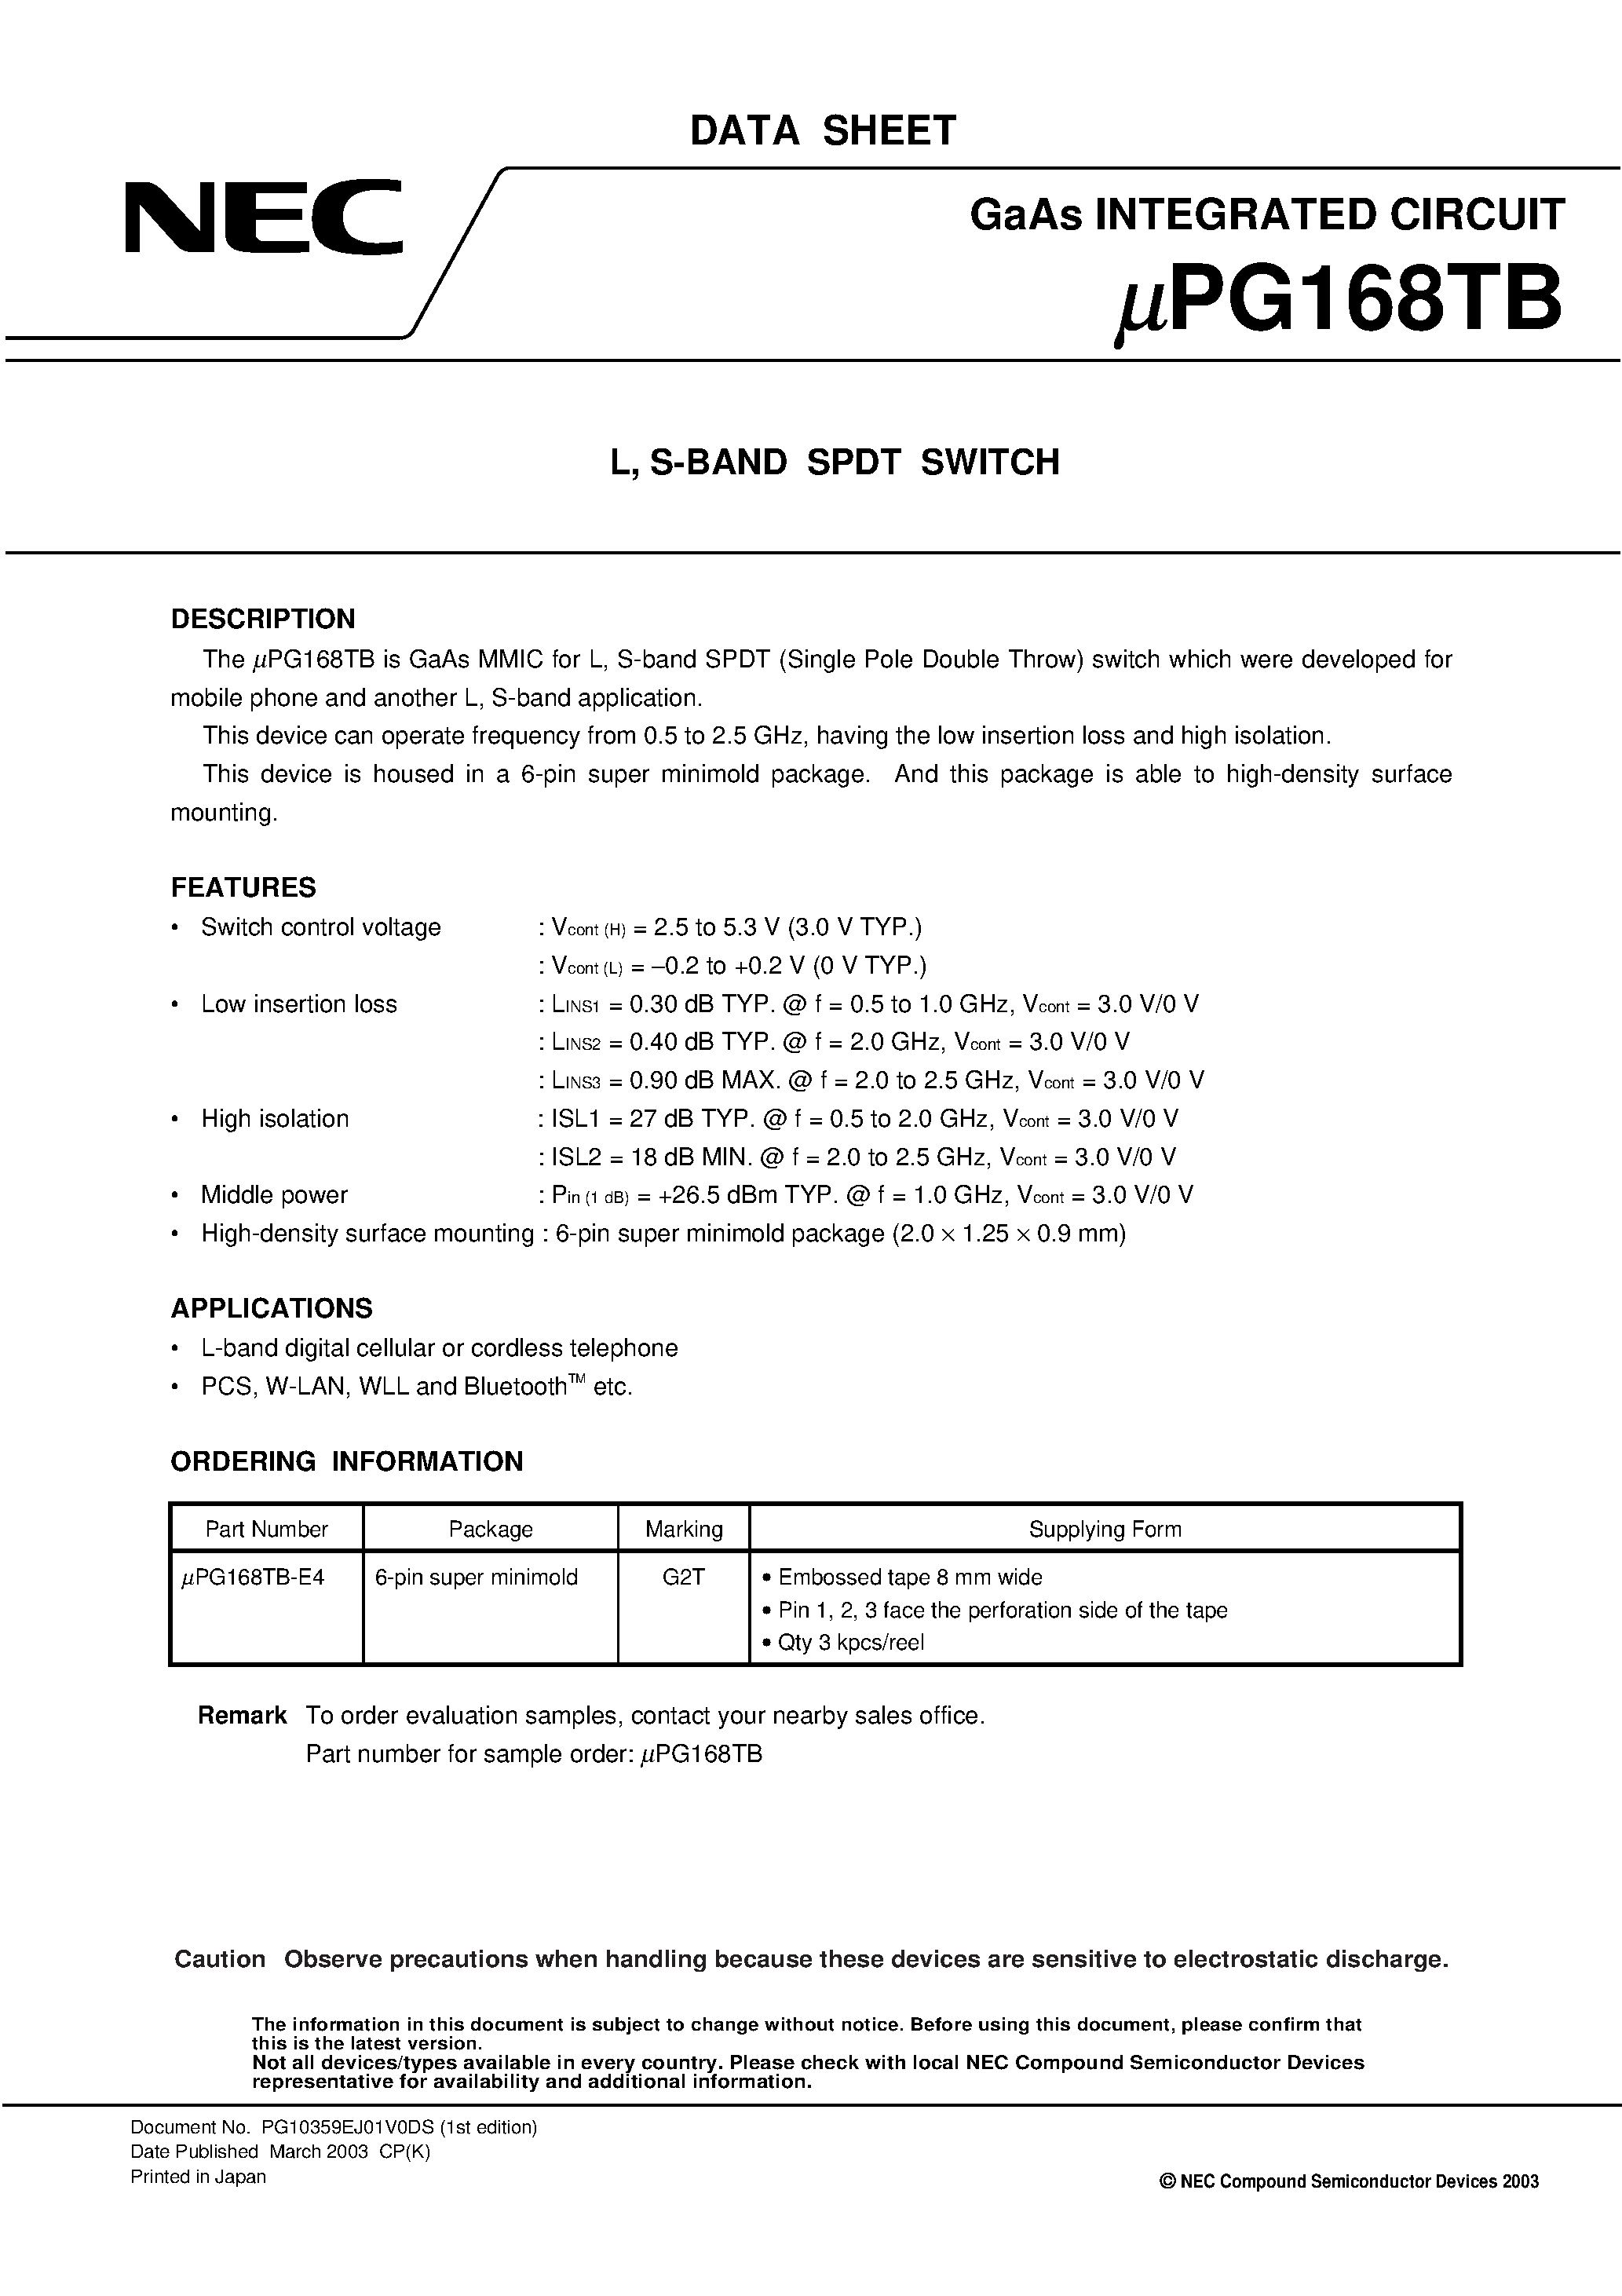 Datasheet UPG168TB - L / S-BAND SPDT SWITCH page 1